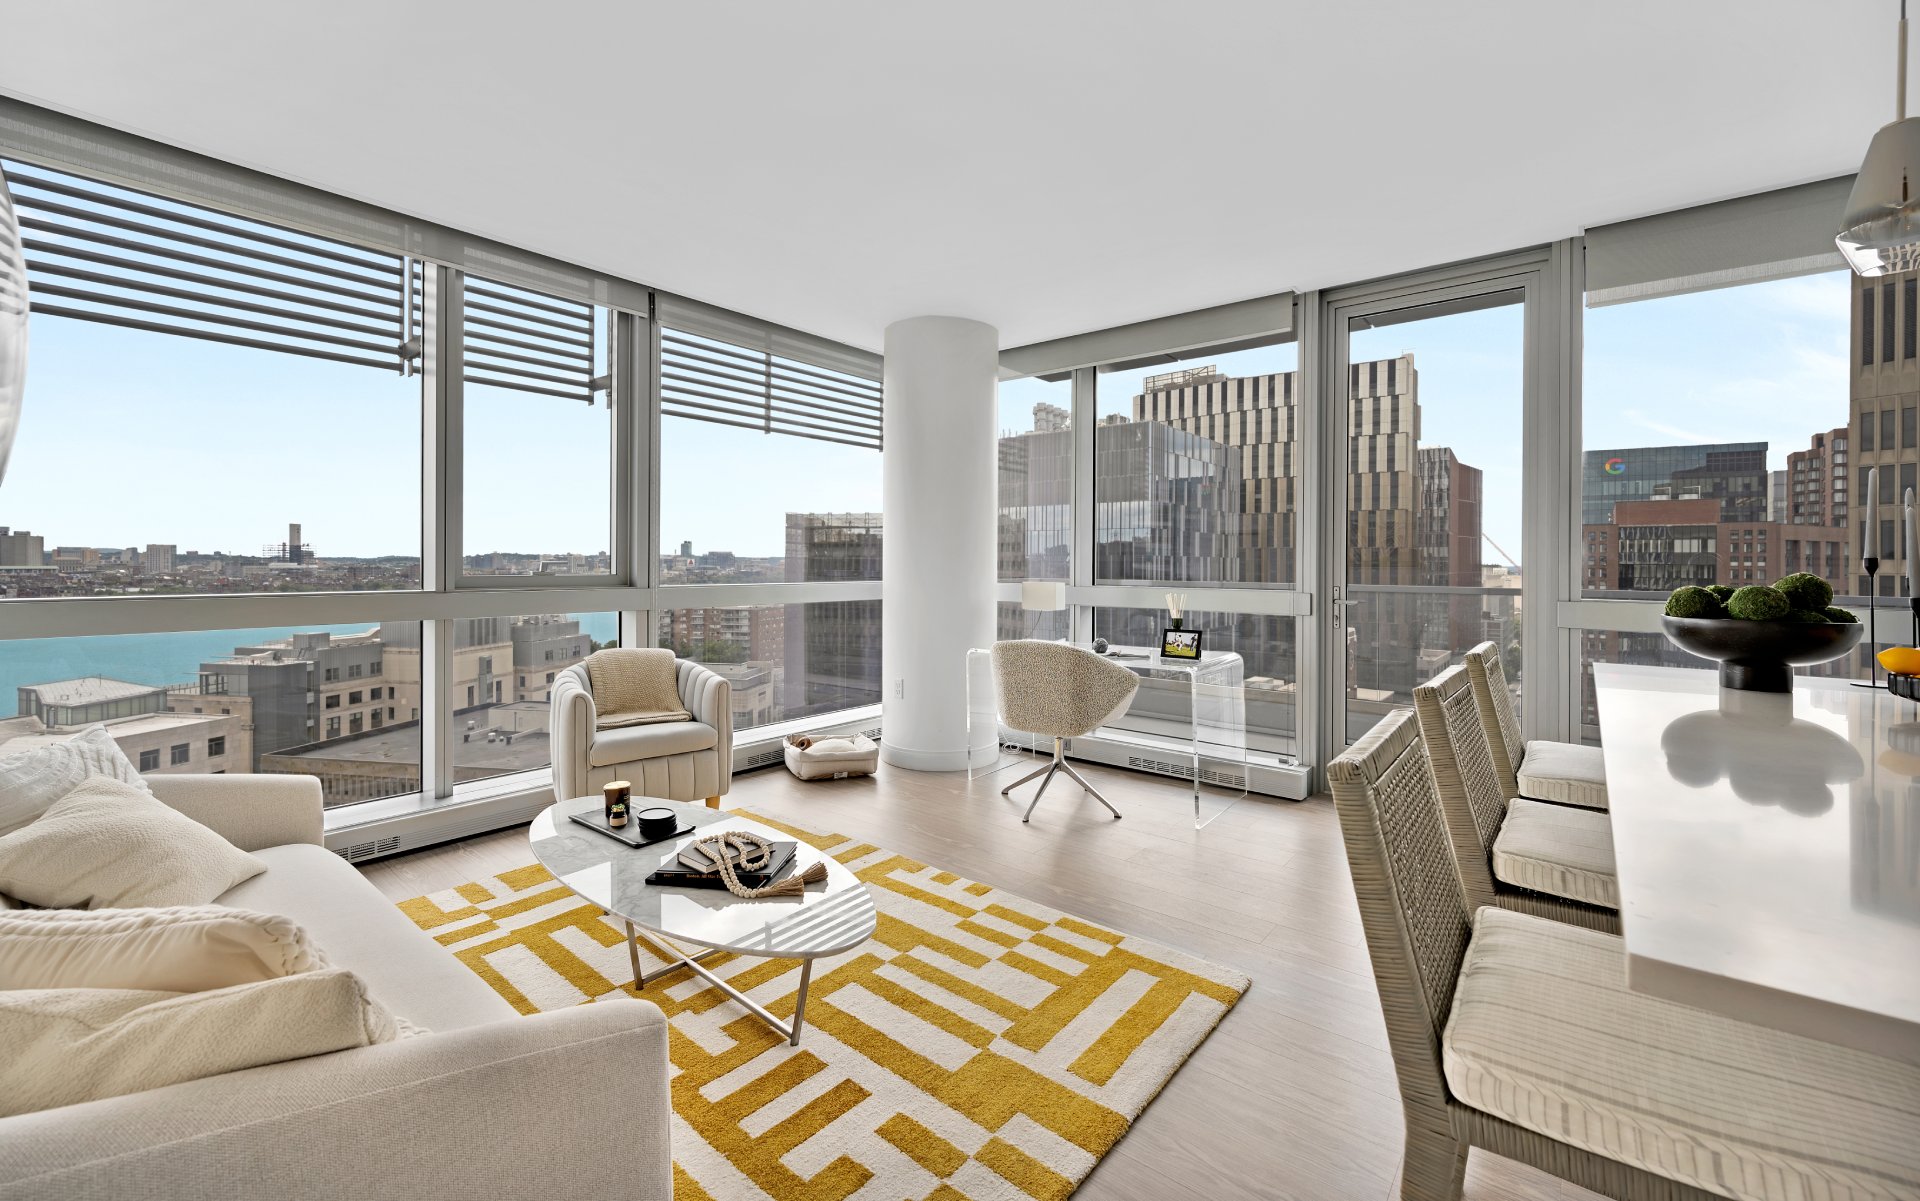 White-themed living area with floor-to-ceiling glass windows showcasing the city skyline. Warm brown wooden flooring accented by a yellow carpet